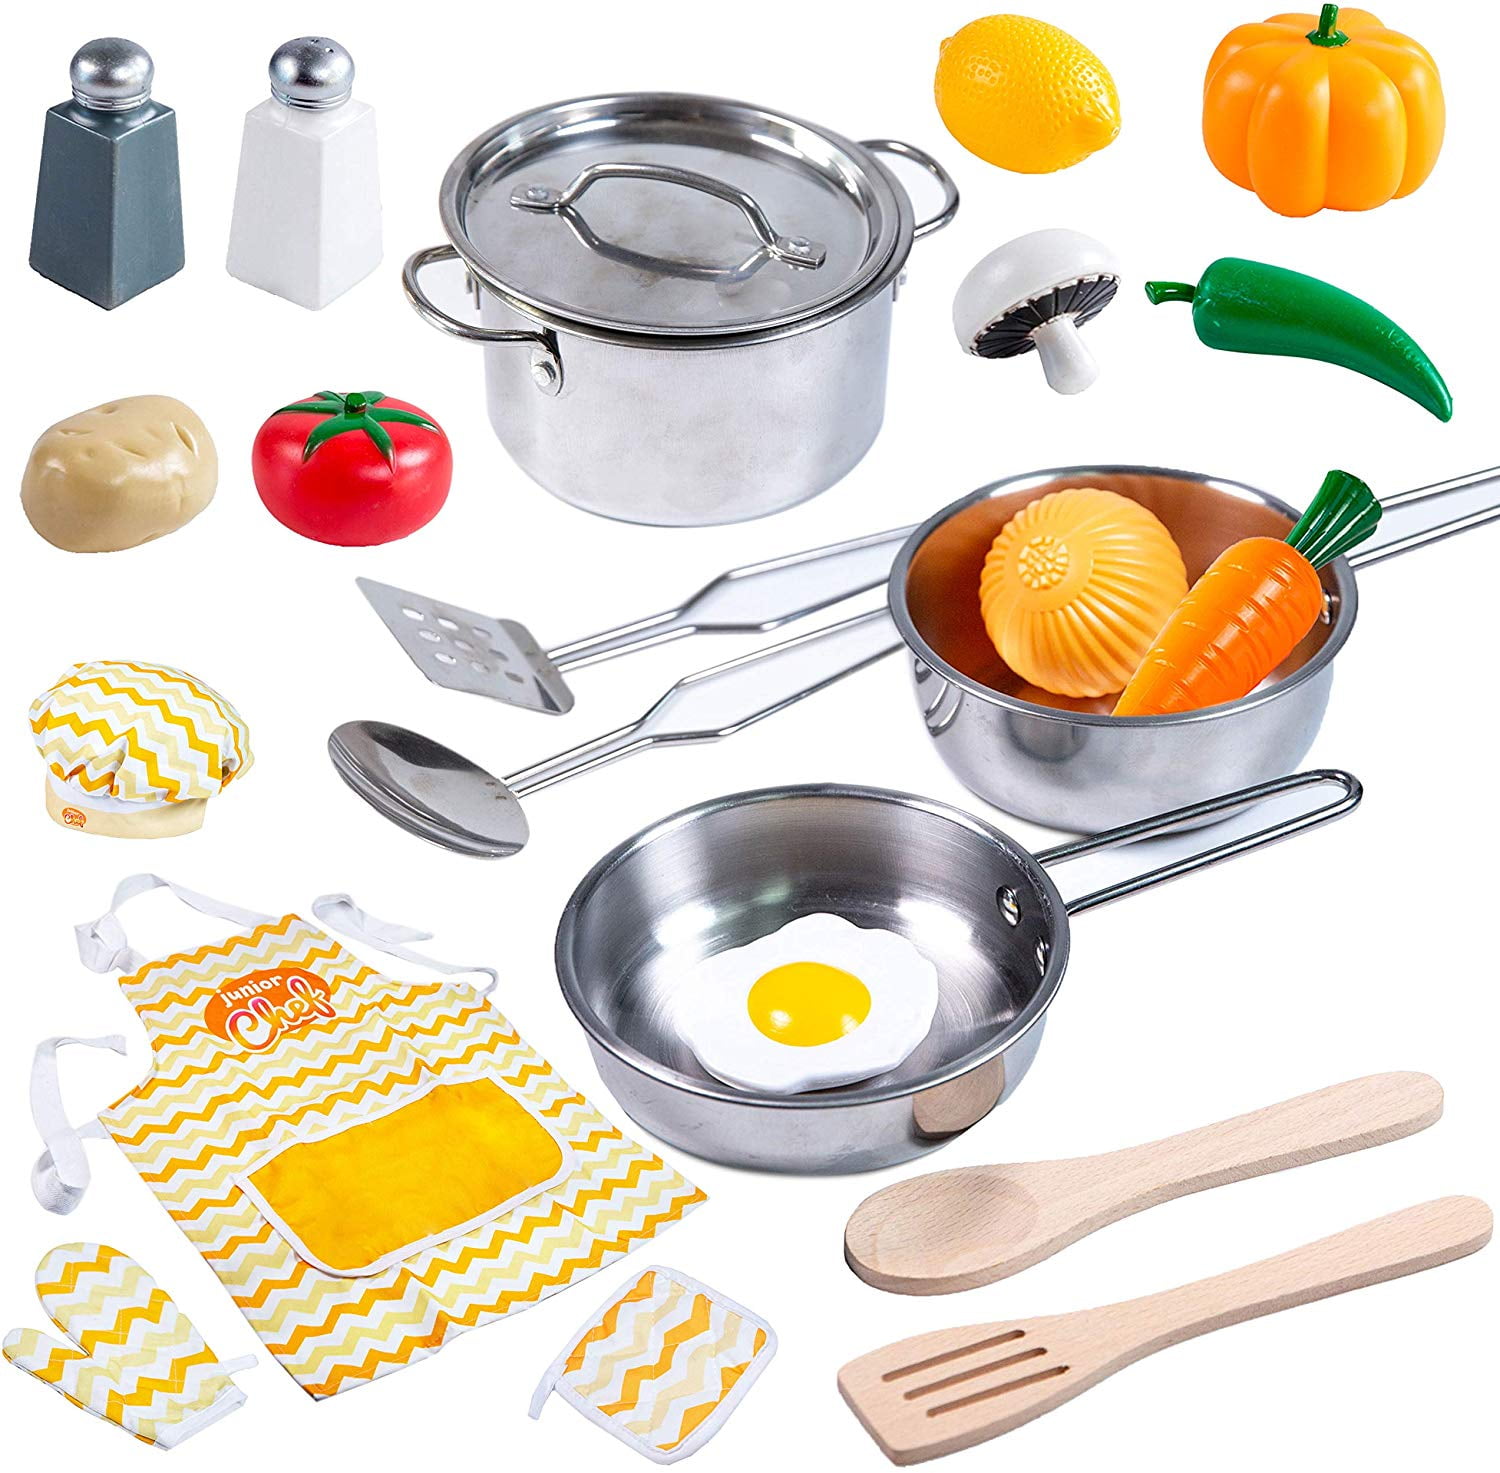 Easong 8Pcs Girls Cooking Apron Hat Stainless Steel Pot Set Kitchen Role Play Toy Kids Non-Toxic Materials No Sharp Edges Safe Reusable Baking Costume For Kids Apron Chef Hat Wok Pot